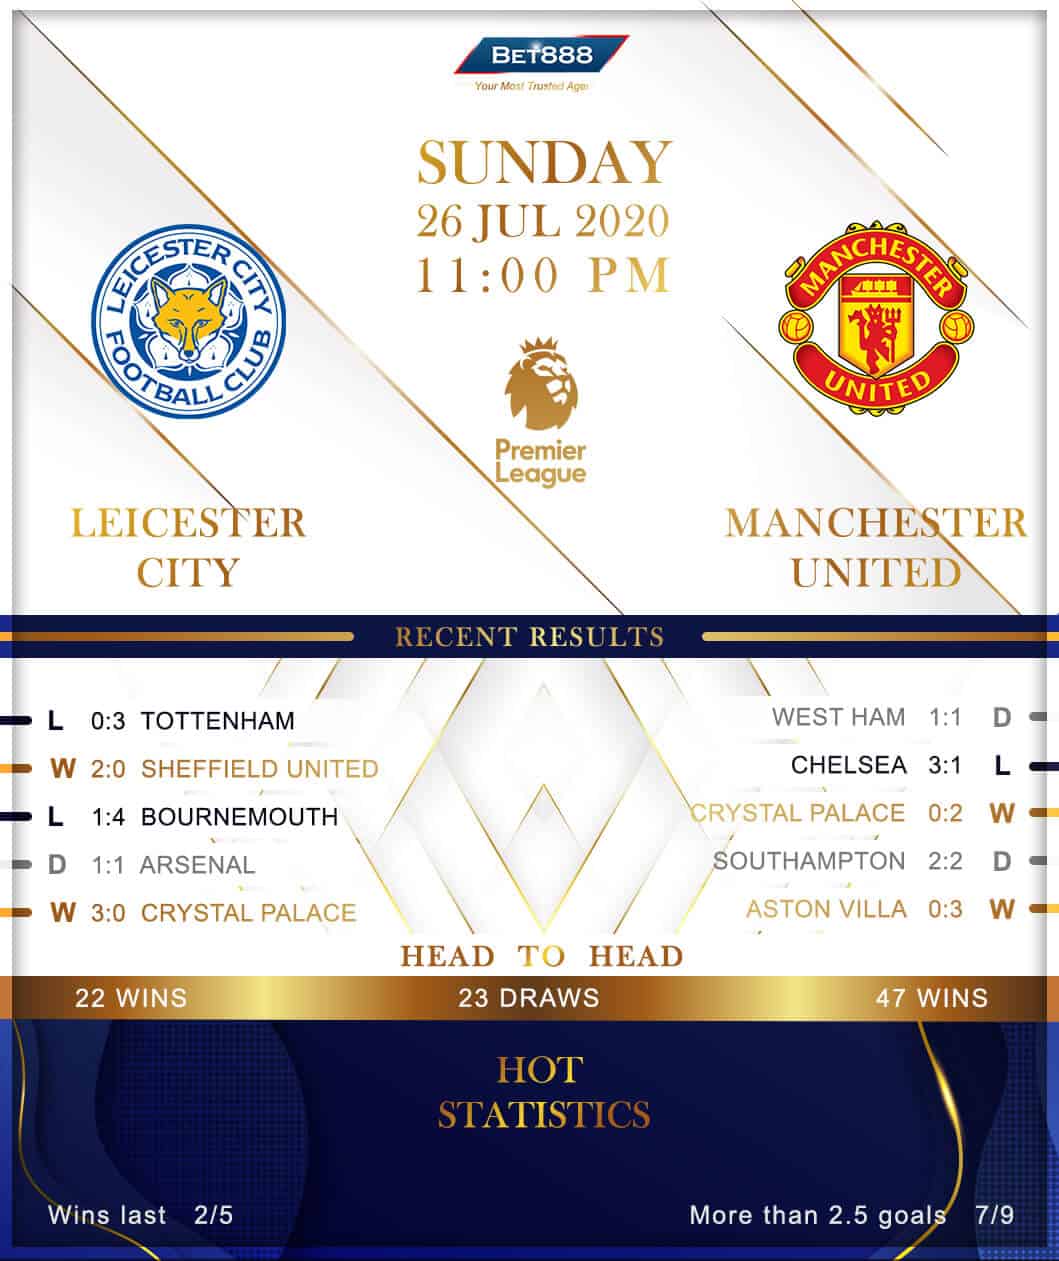 Leicester City vs Manchester United 26/07/20